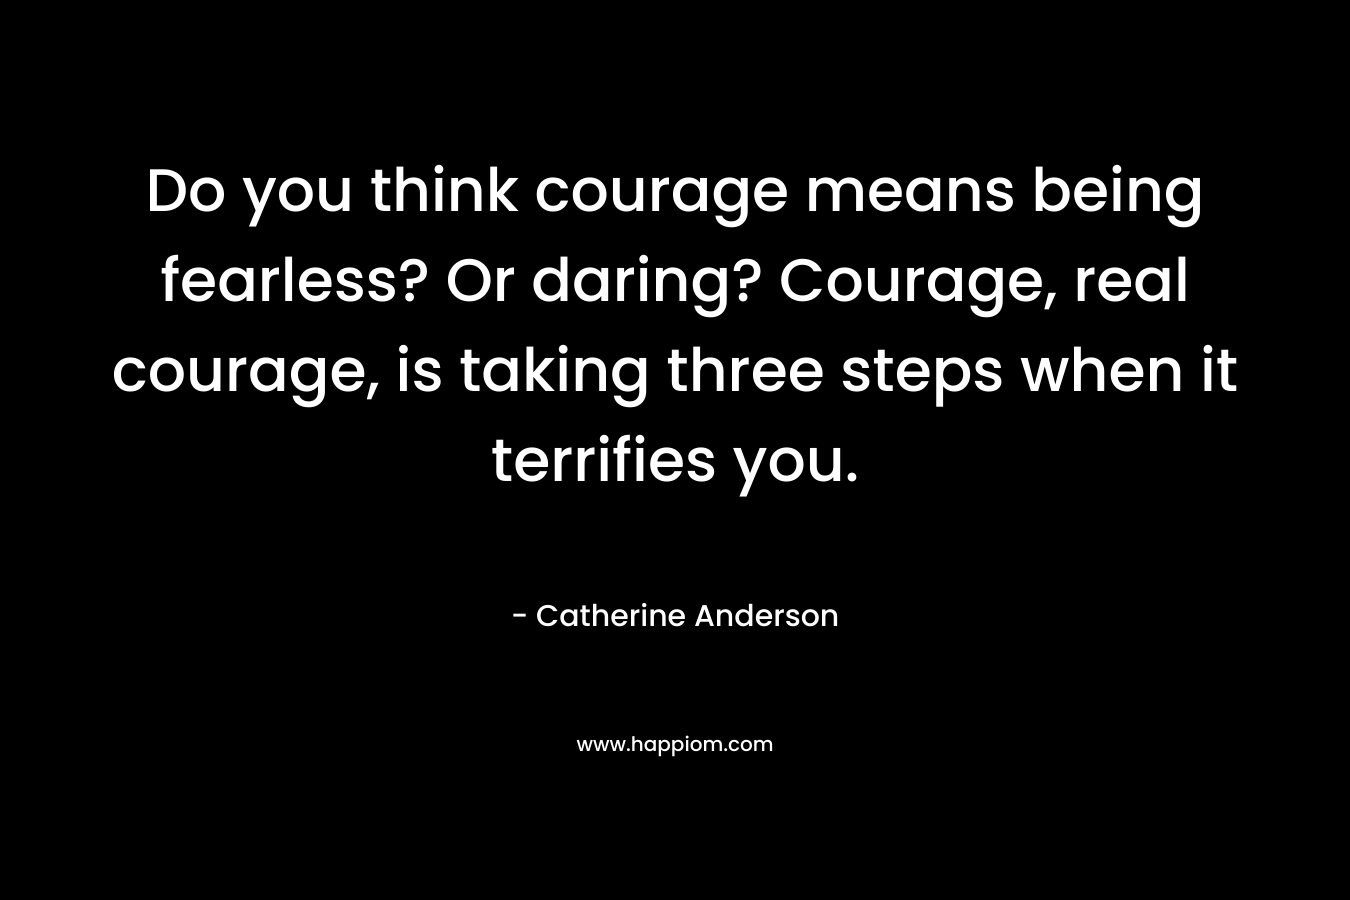 Do you think courage means being fearless? Or daring? Courage, real courage, is taking three steps when it terrifies you.